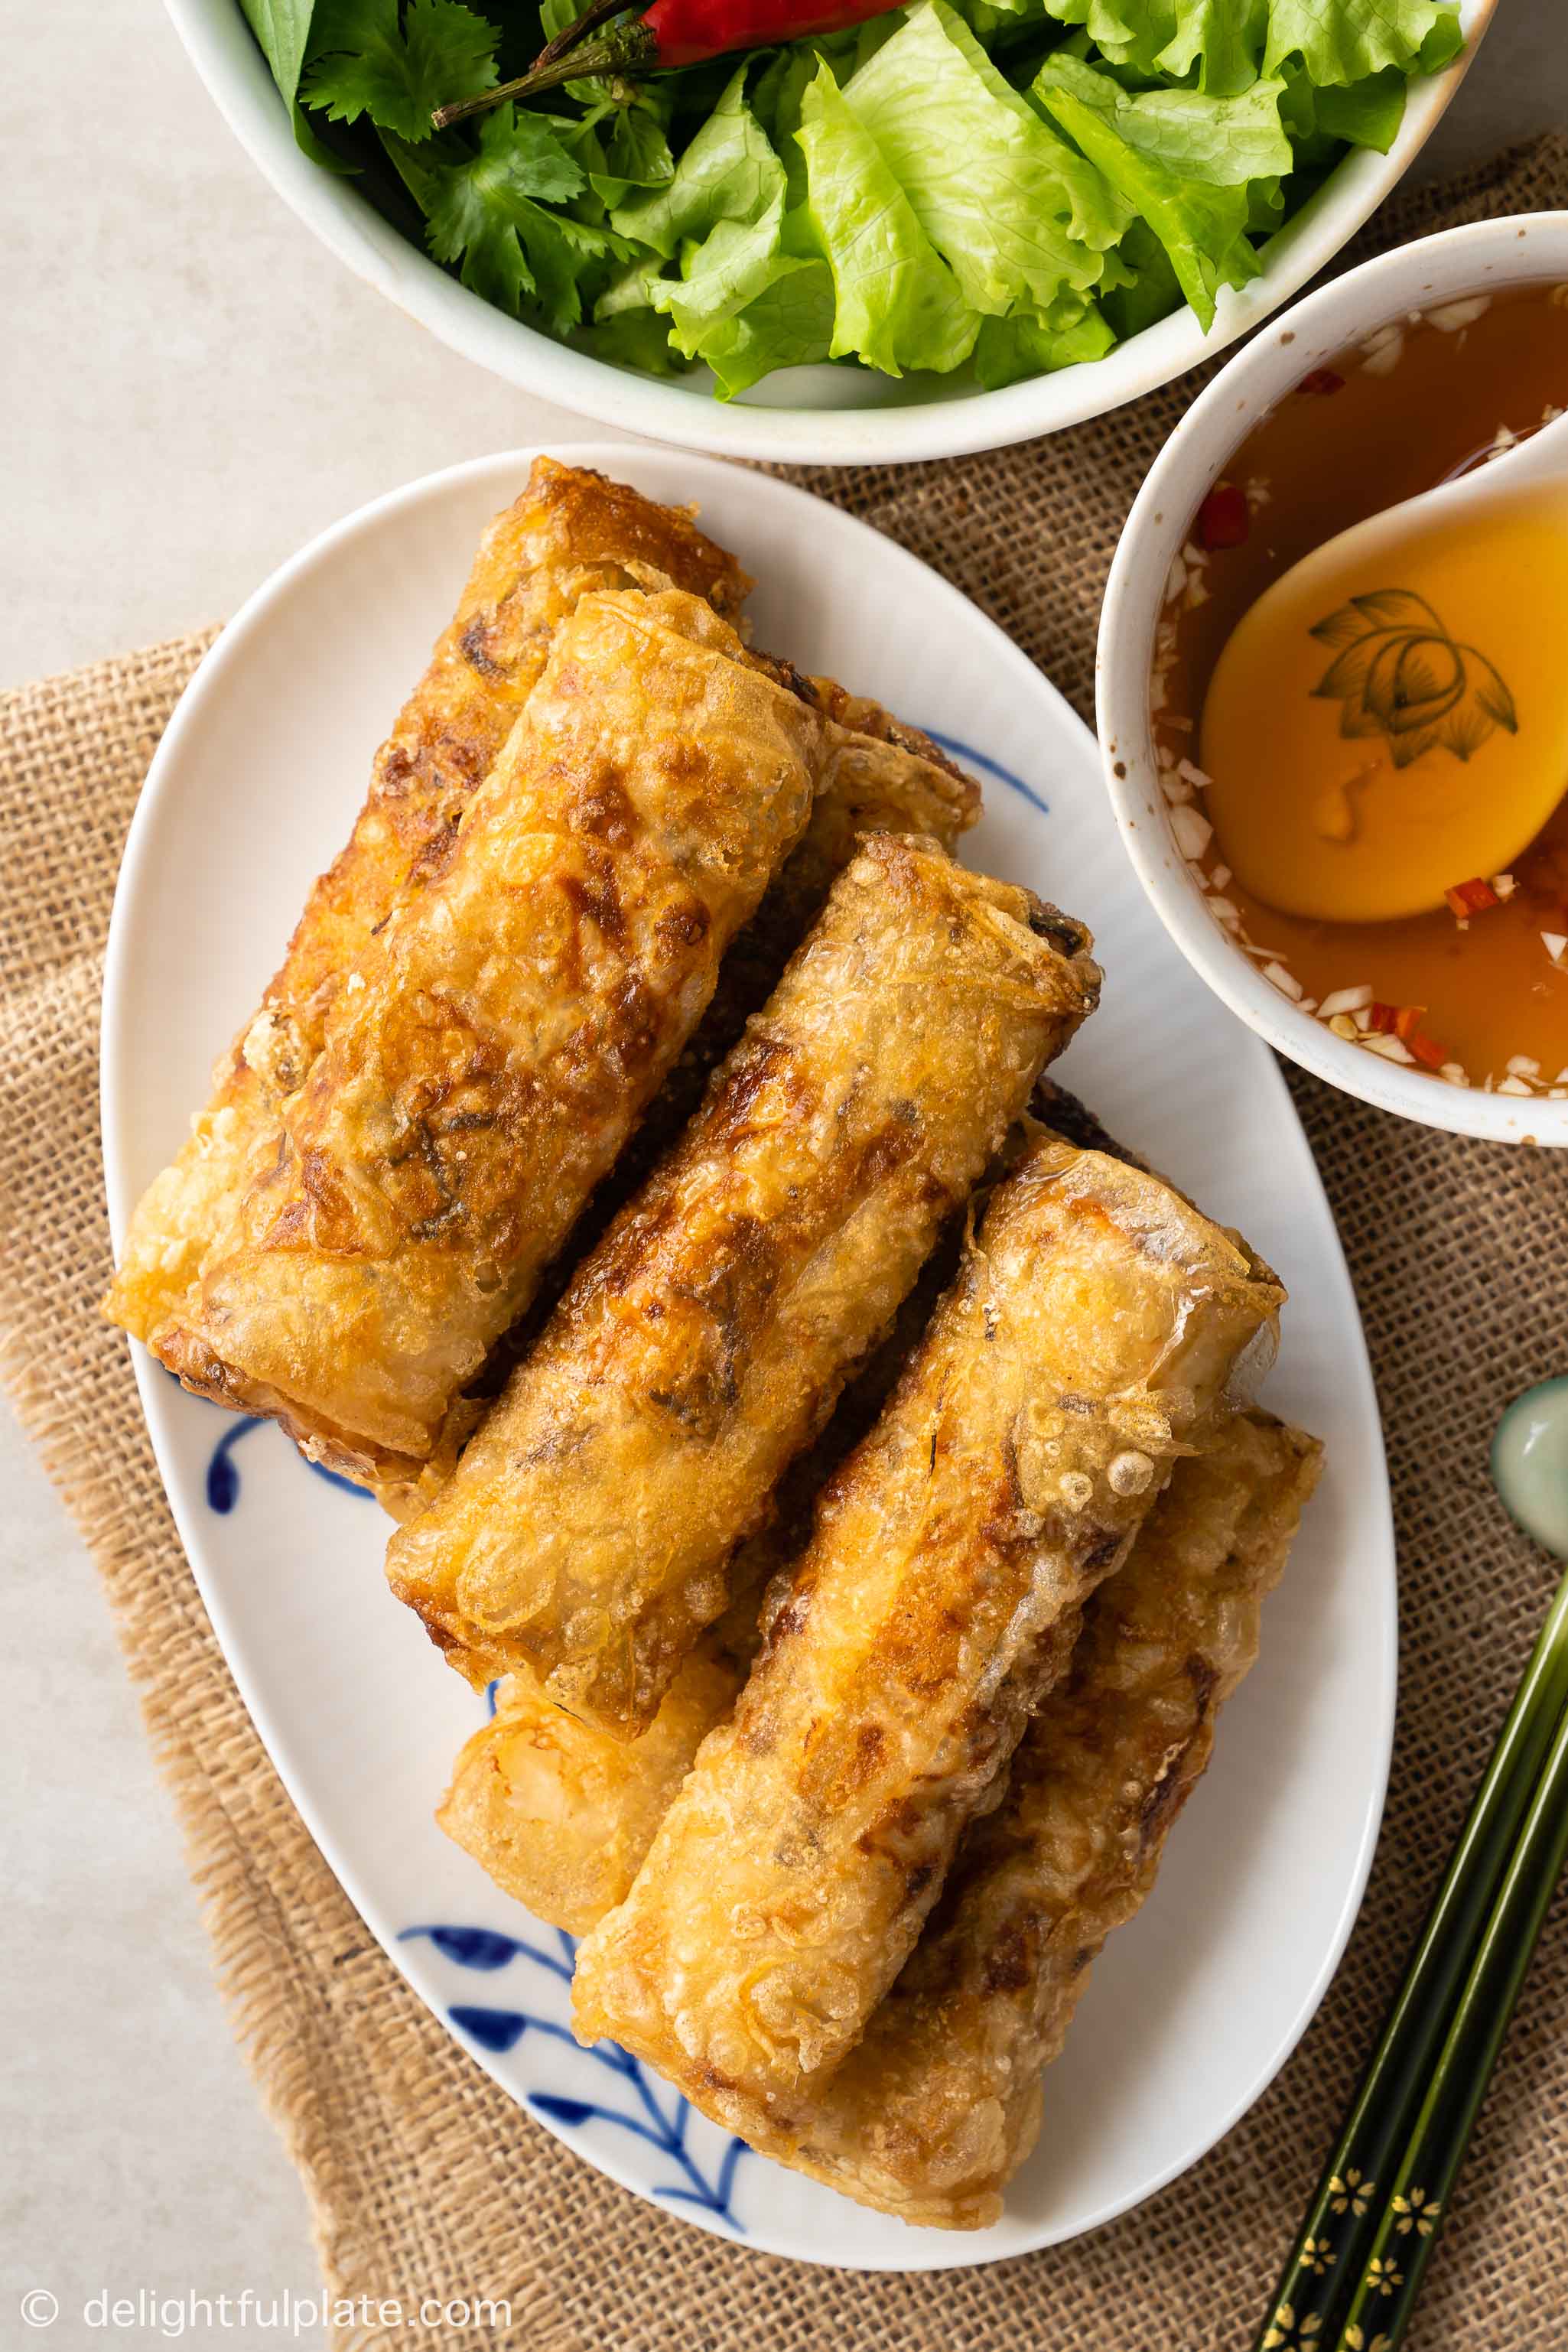 Vietnamese Fried Spring Roll is a popular and delightful appetizer